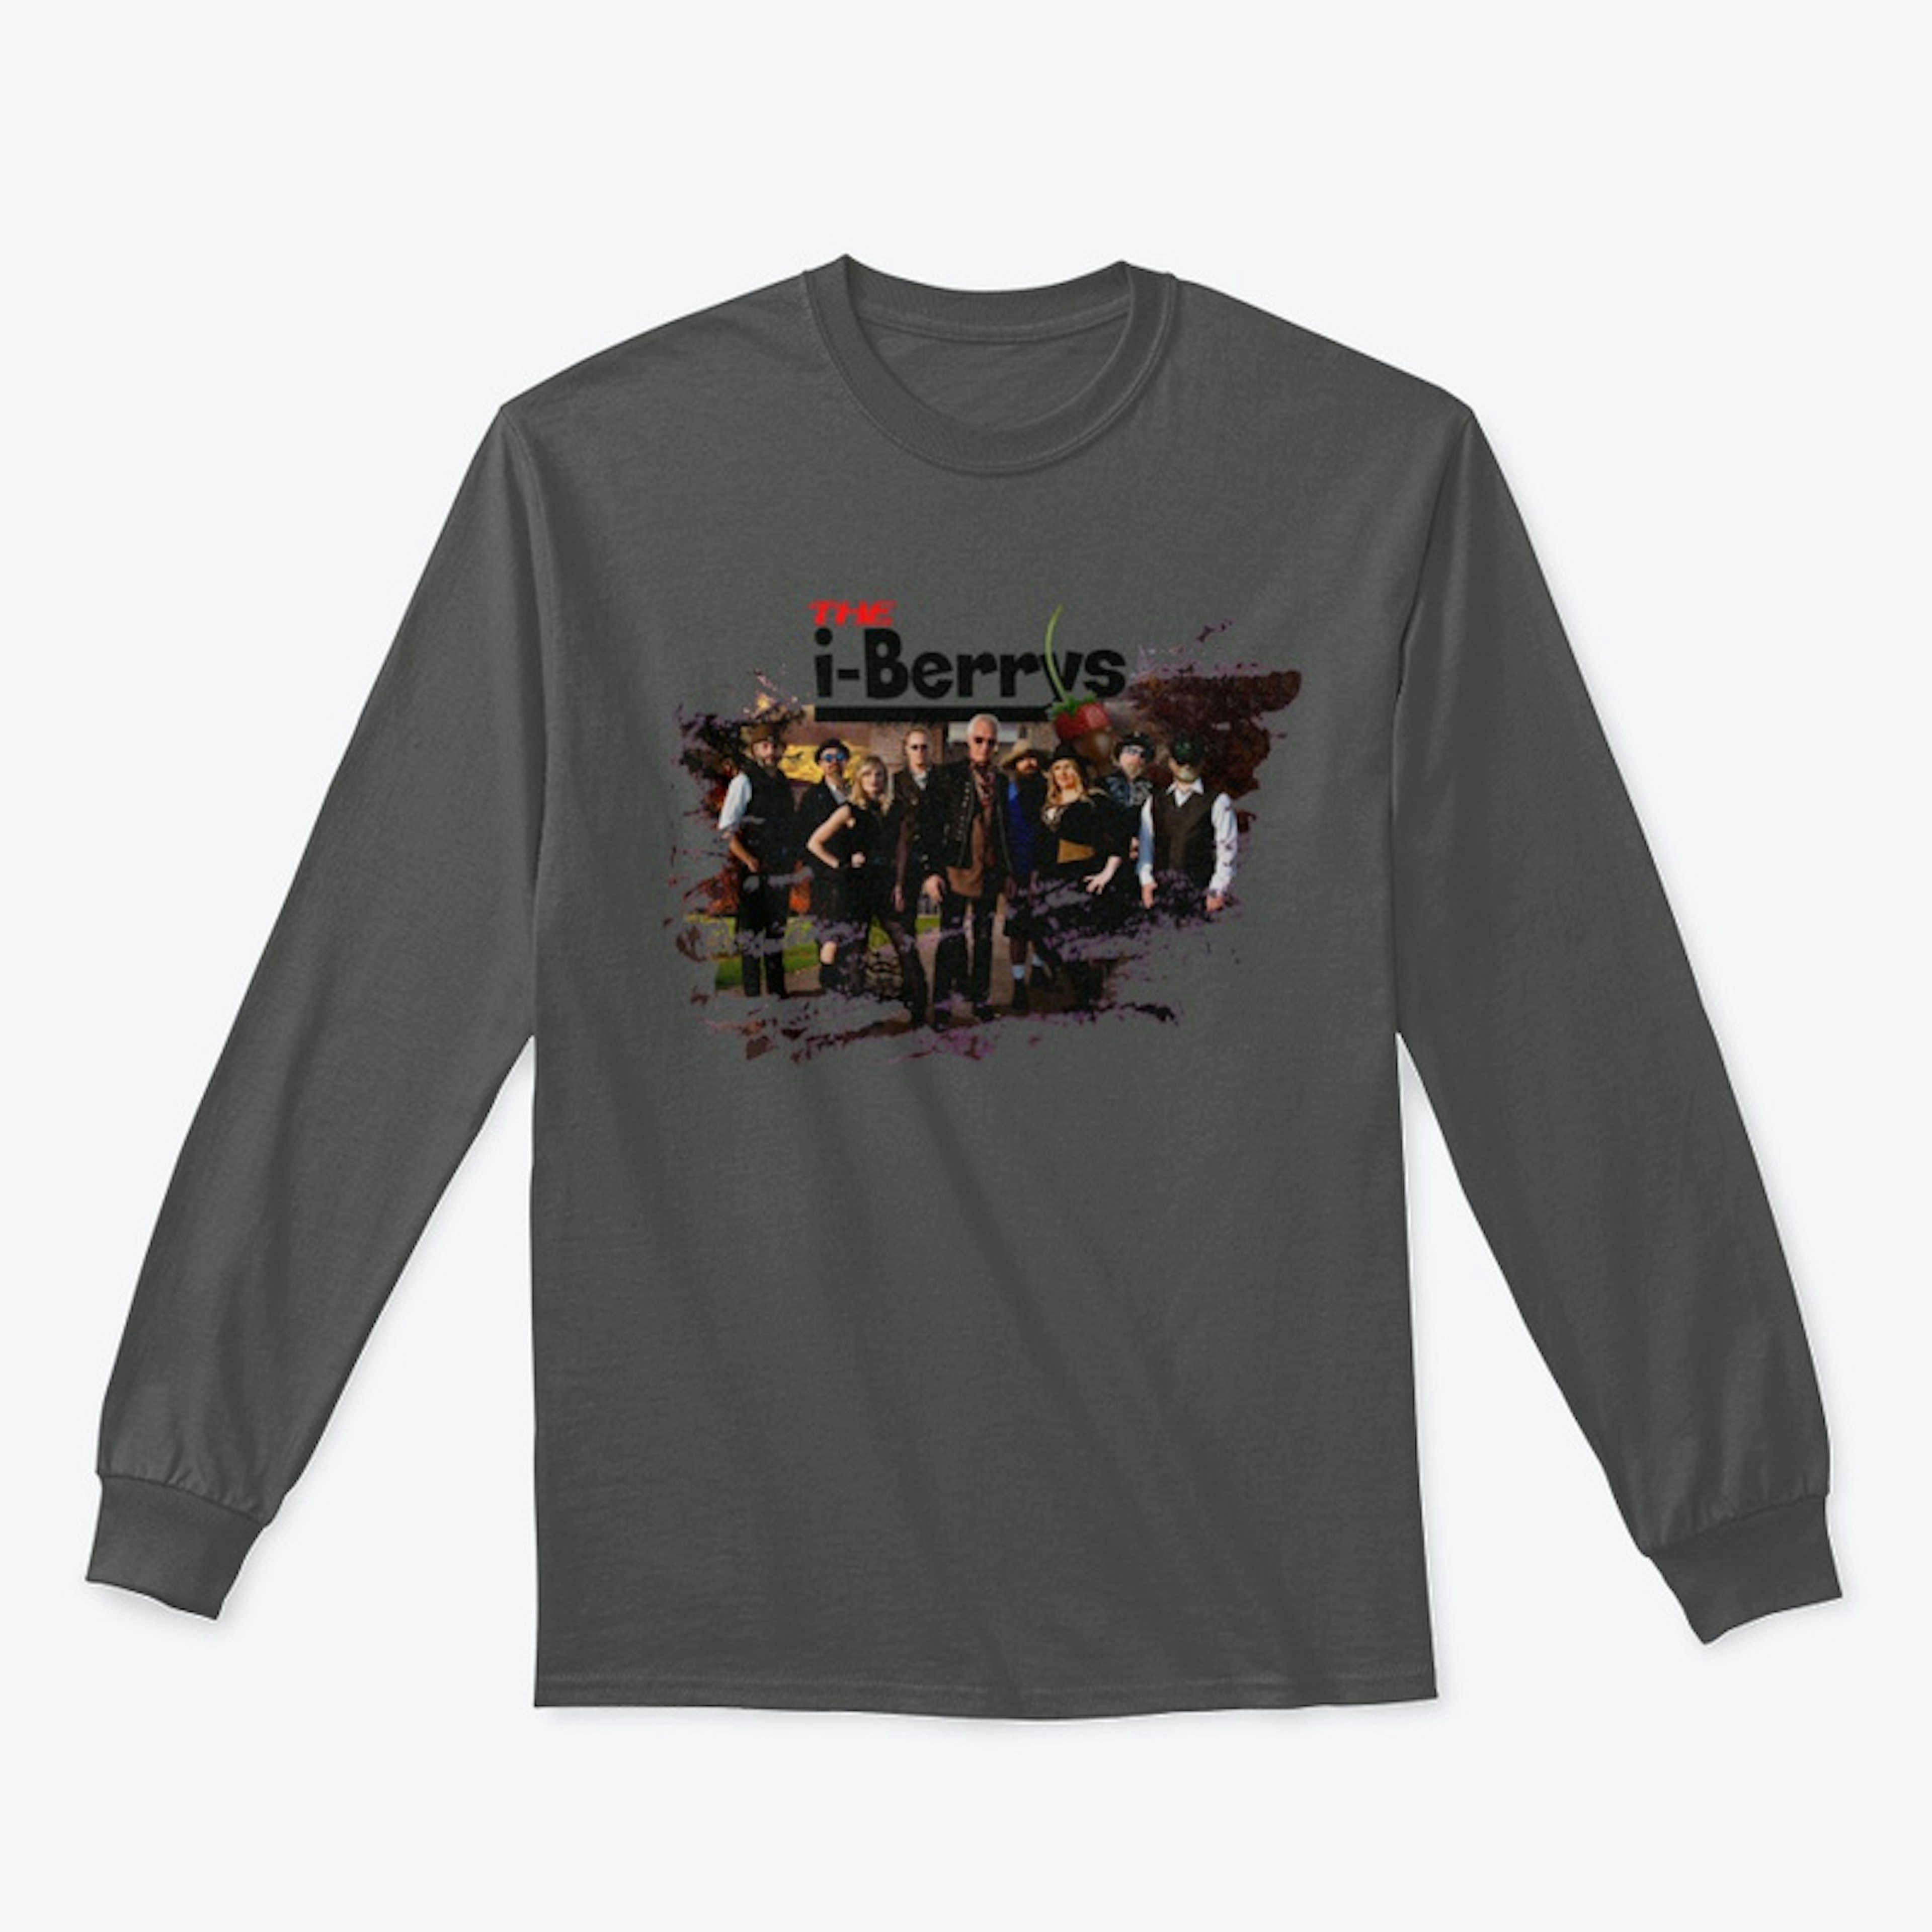 Men's Long Sleeve with Group Photo